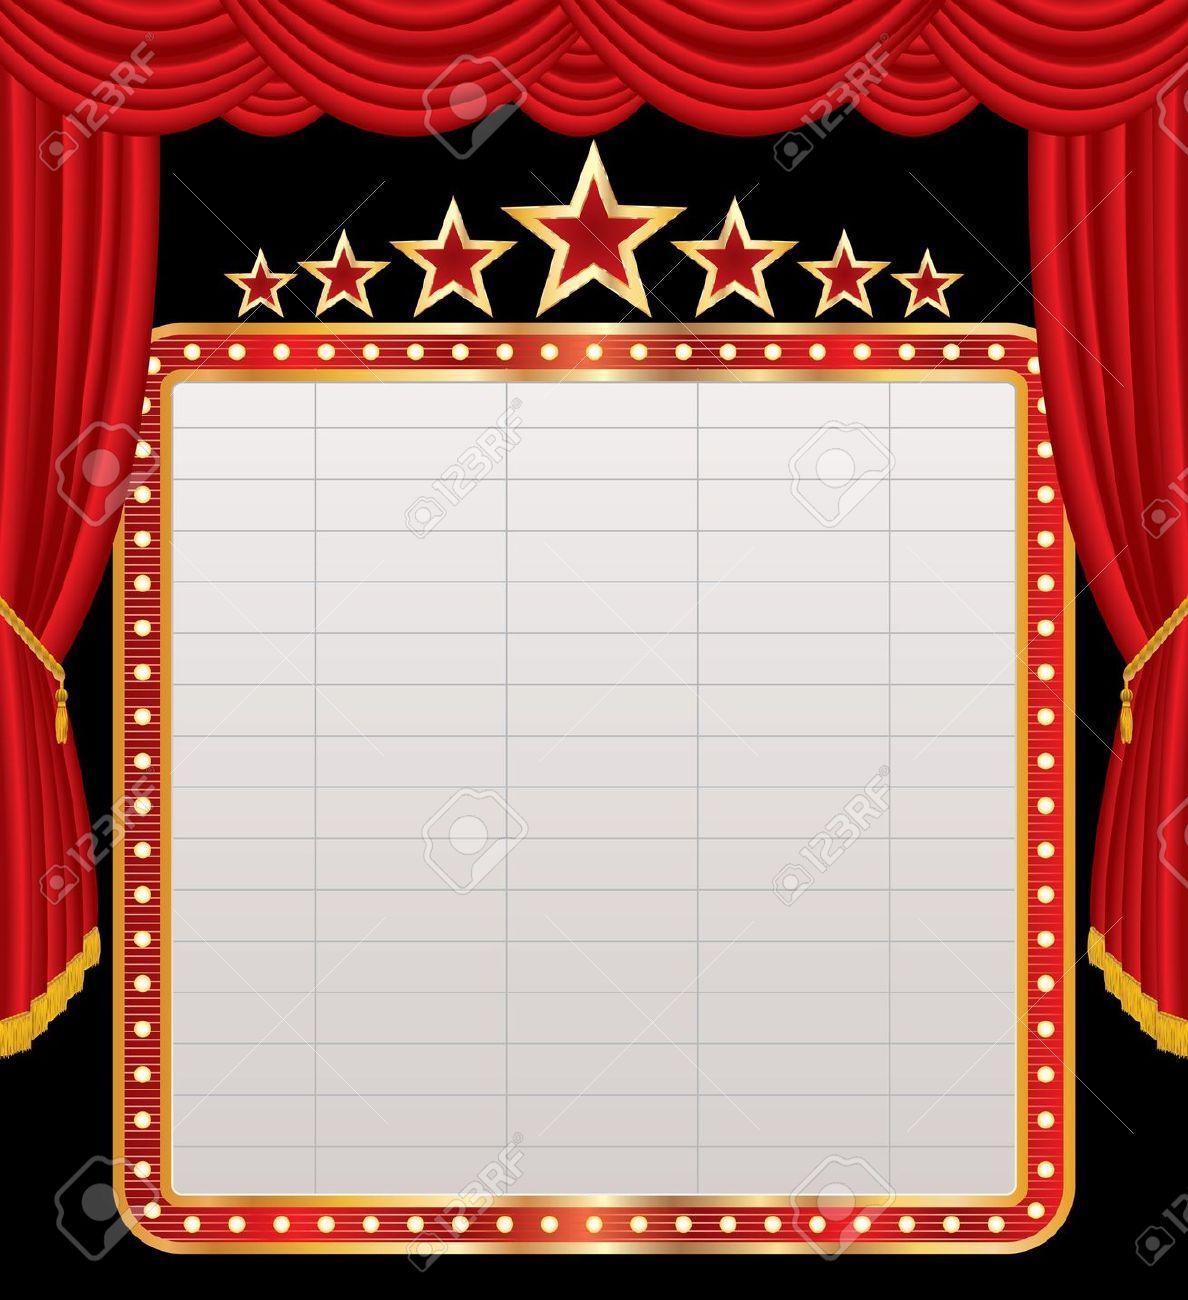 marquee clipart vector